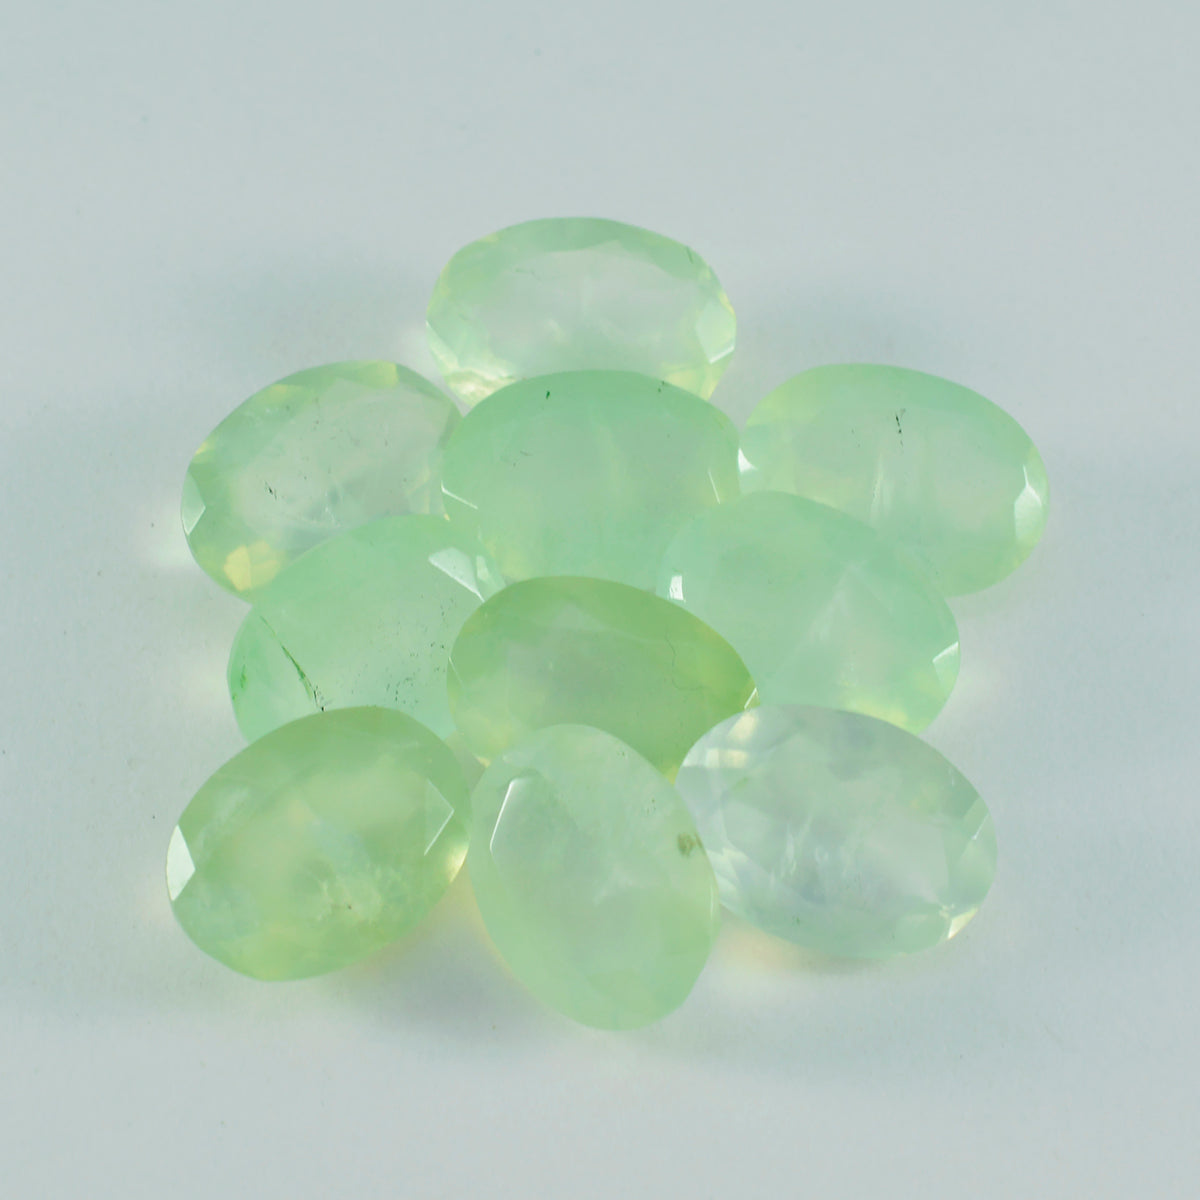 Riyogems 1PC Green Prehnite Faceted 8x10 mm Oval Shape good-looking Quality Loose Stone